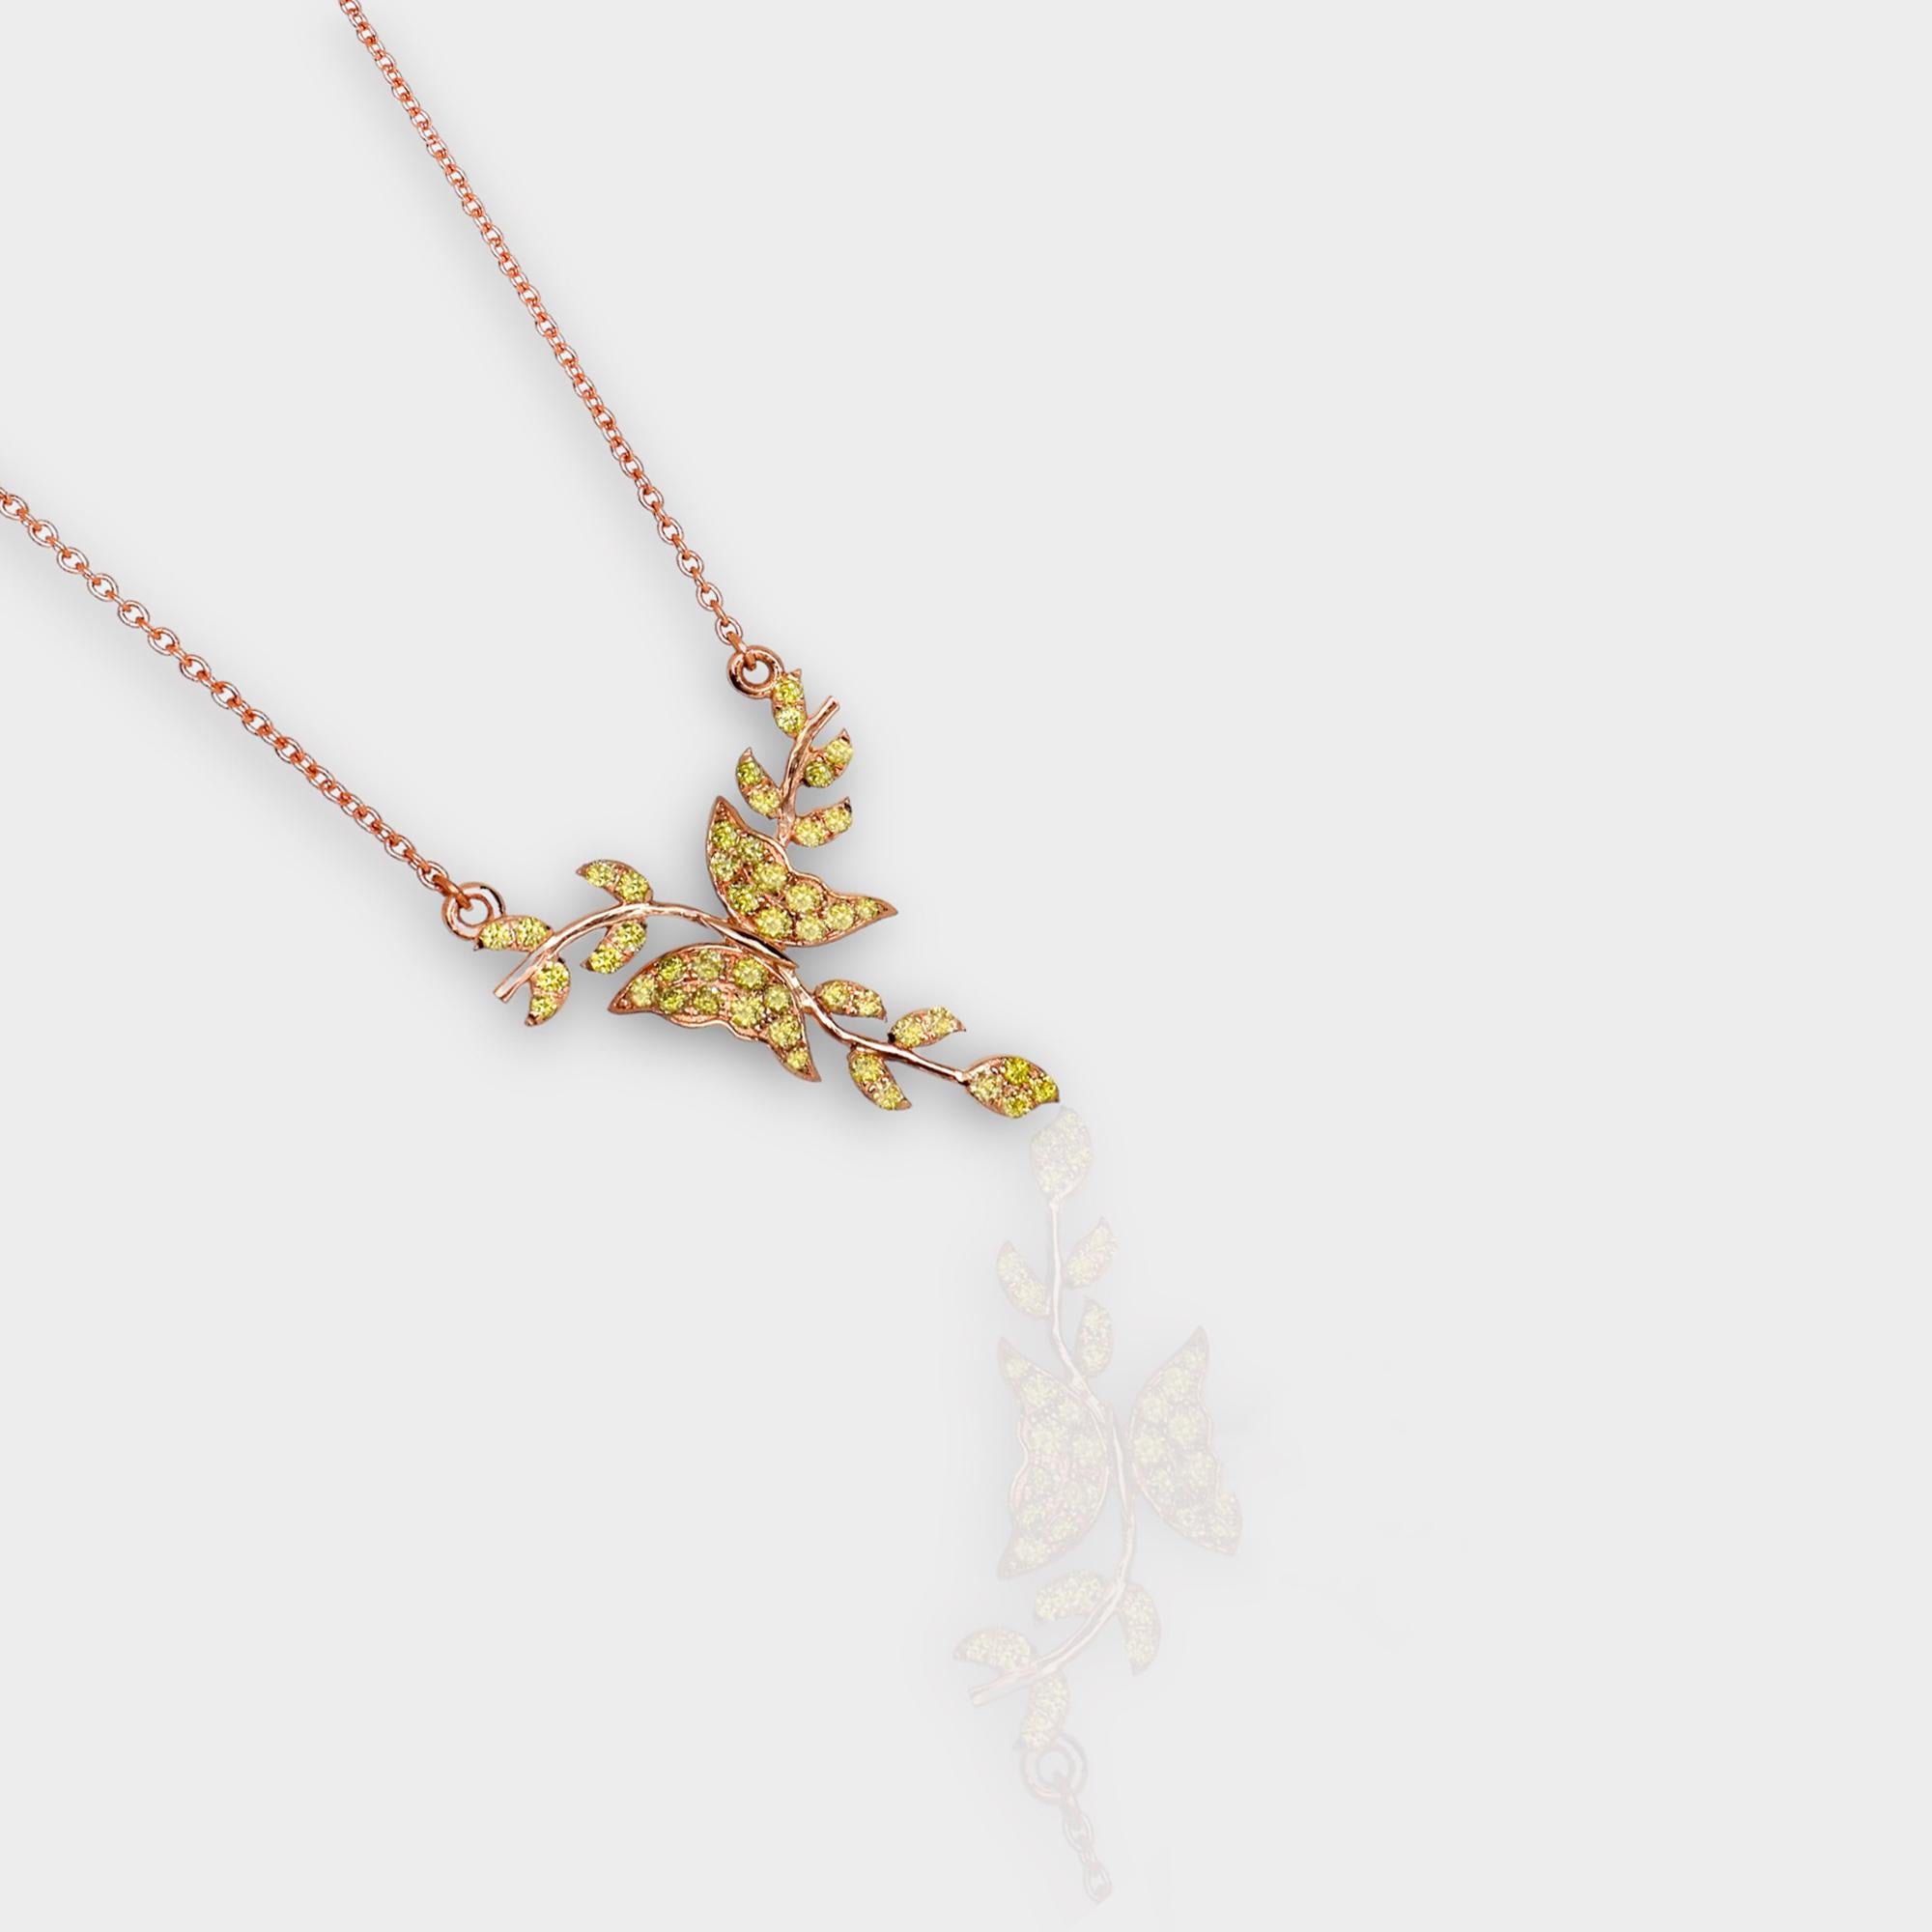 IGI 14K 0.25 ct Natural Greenish Yellow Diamonds Branches Design Necklace In New Condition For Sale In Kaohsiung City, TW